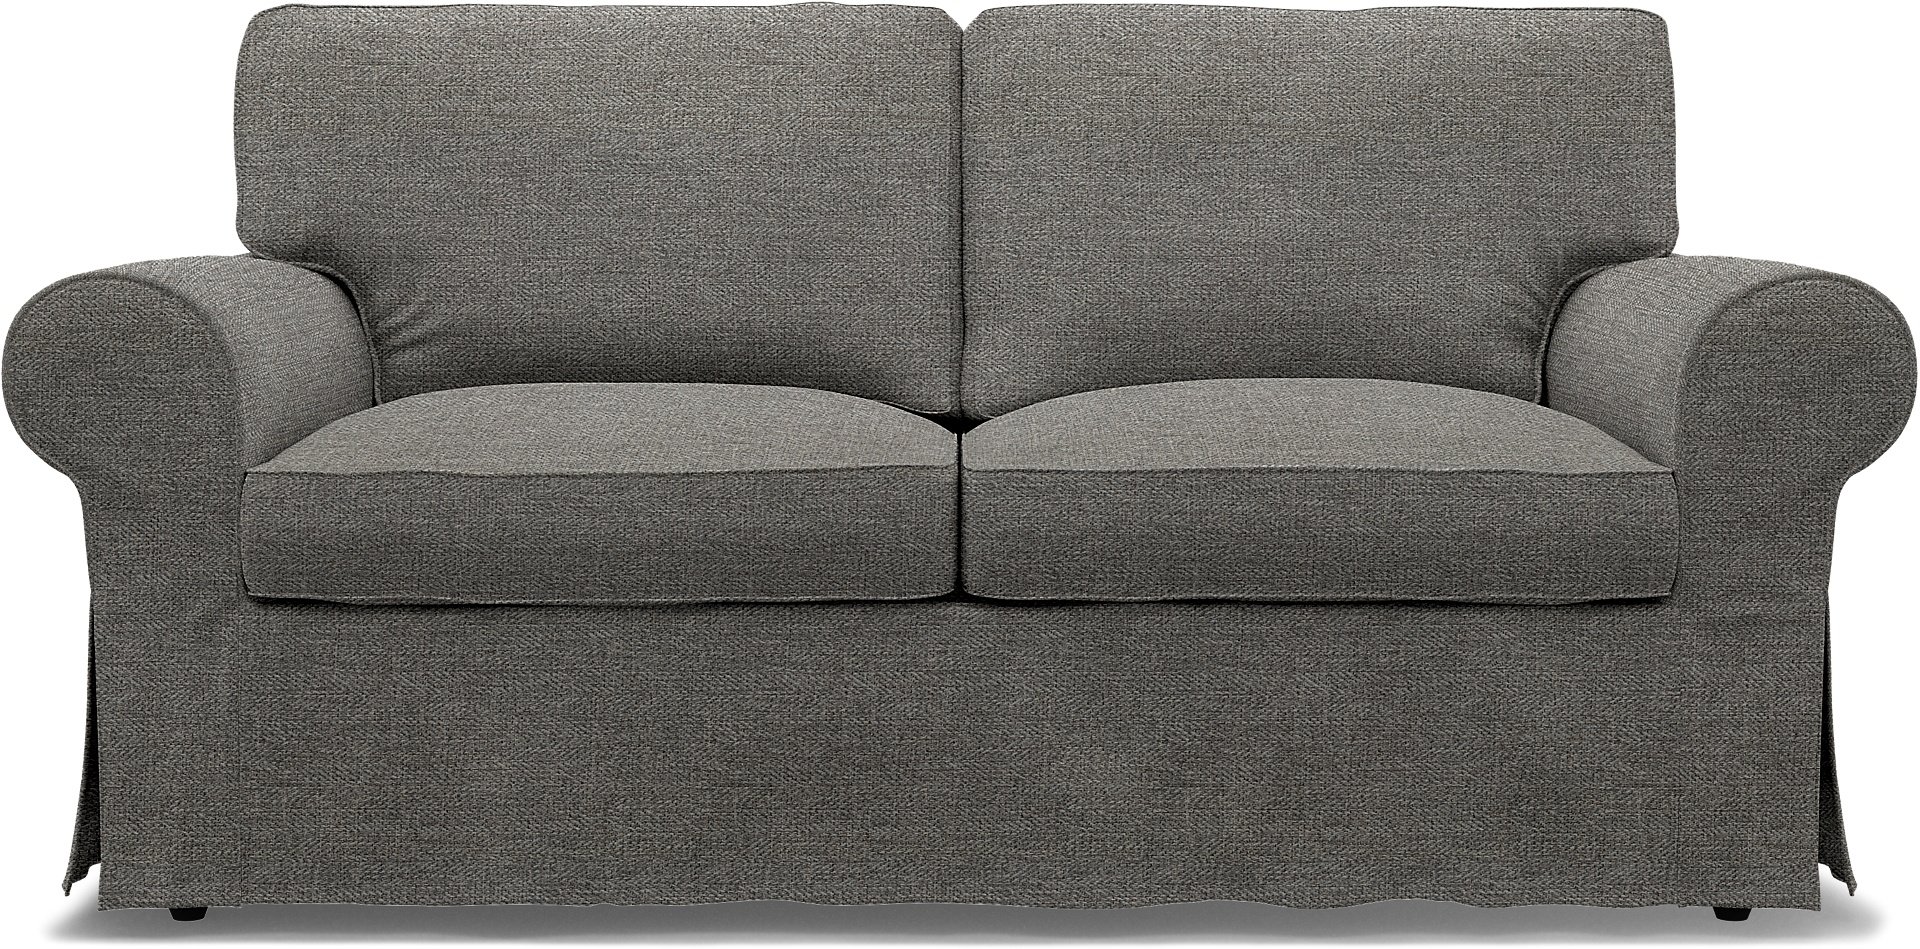 IKEA - Ektorp 2 Seater Sofa Bed Cover, Taupe, Boucle & Texture - Bemz